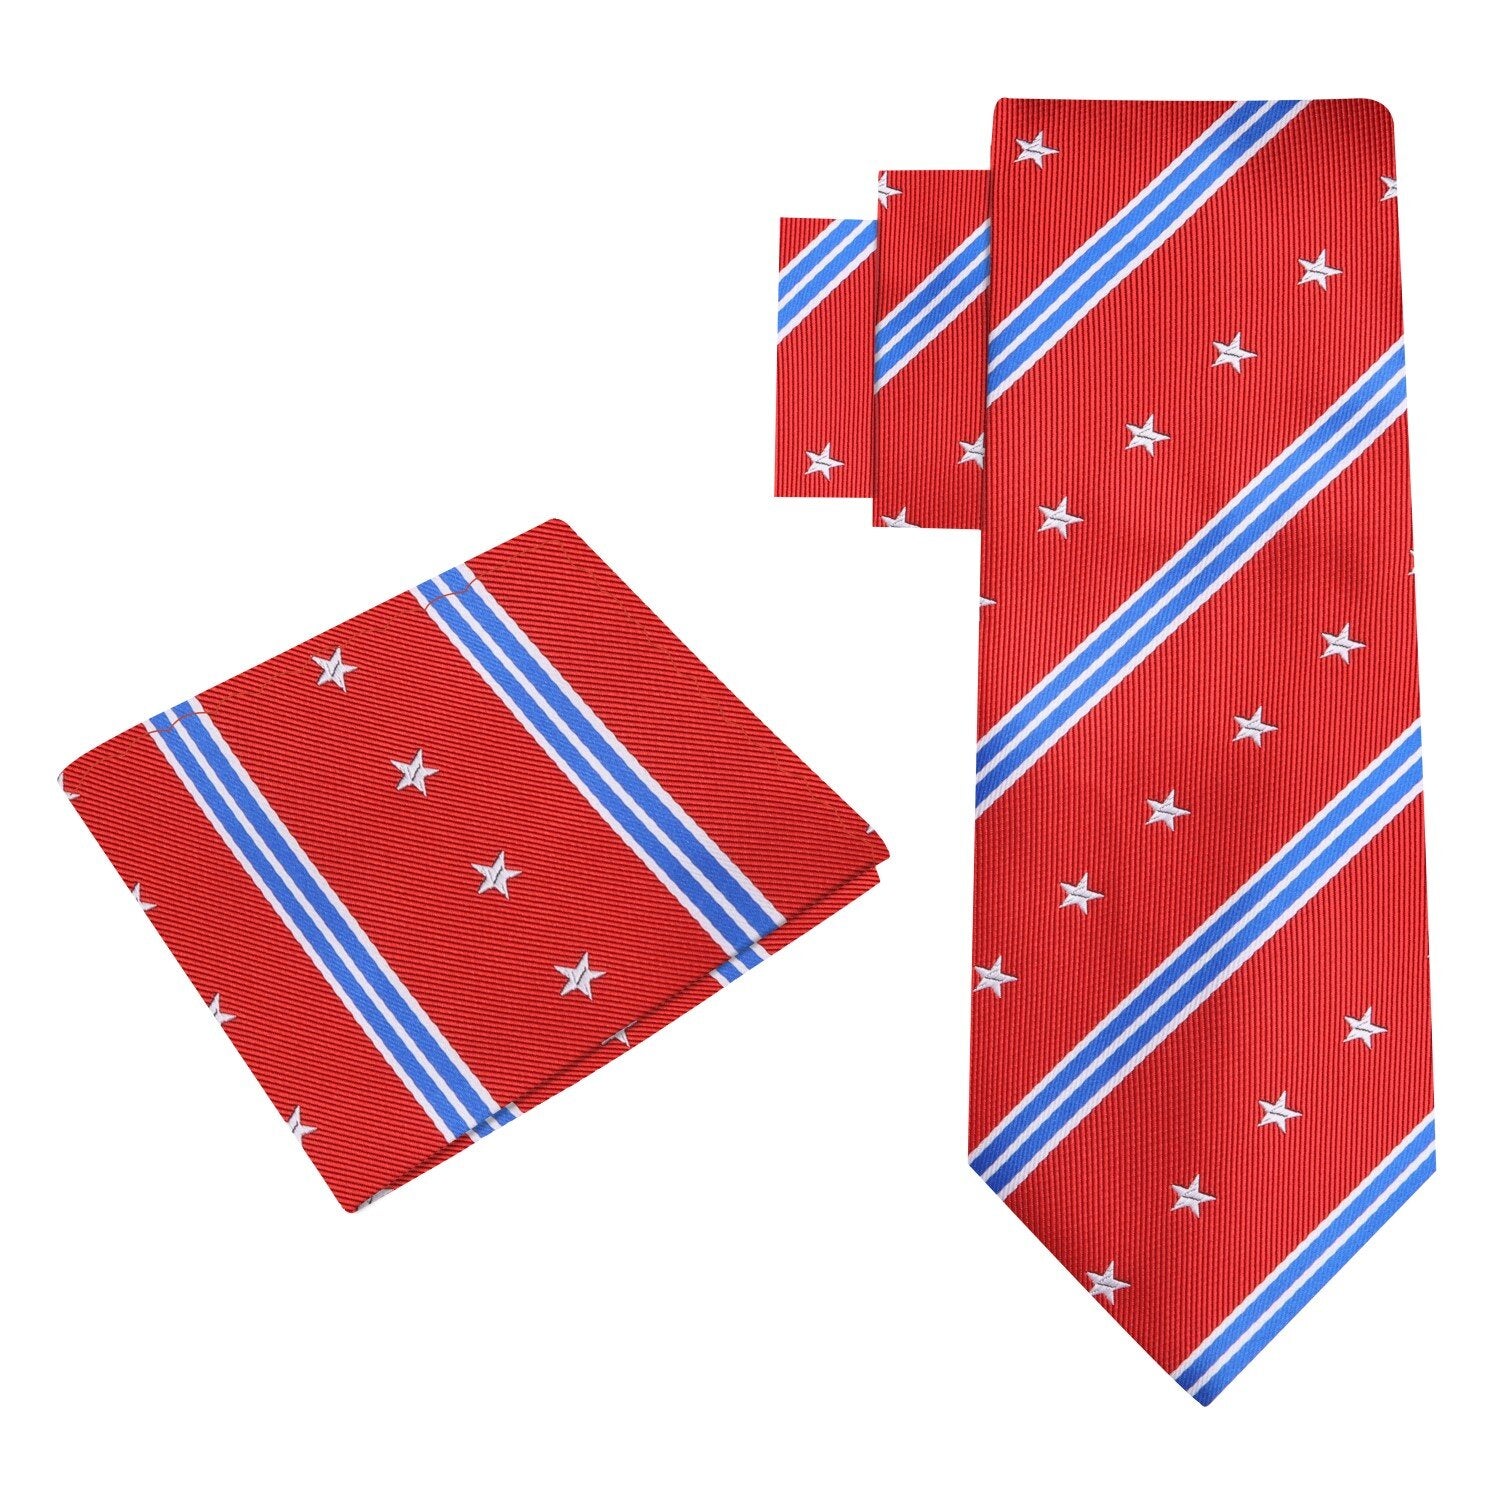 Alt View: Red, Blue, White Stars and Stripes Tie and Square